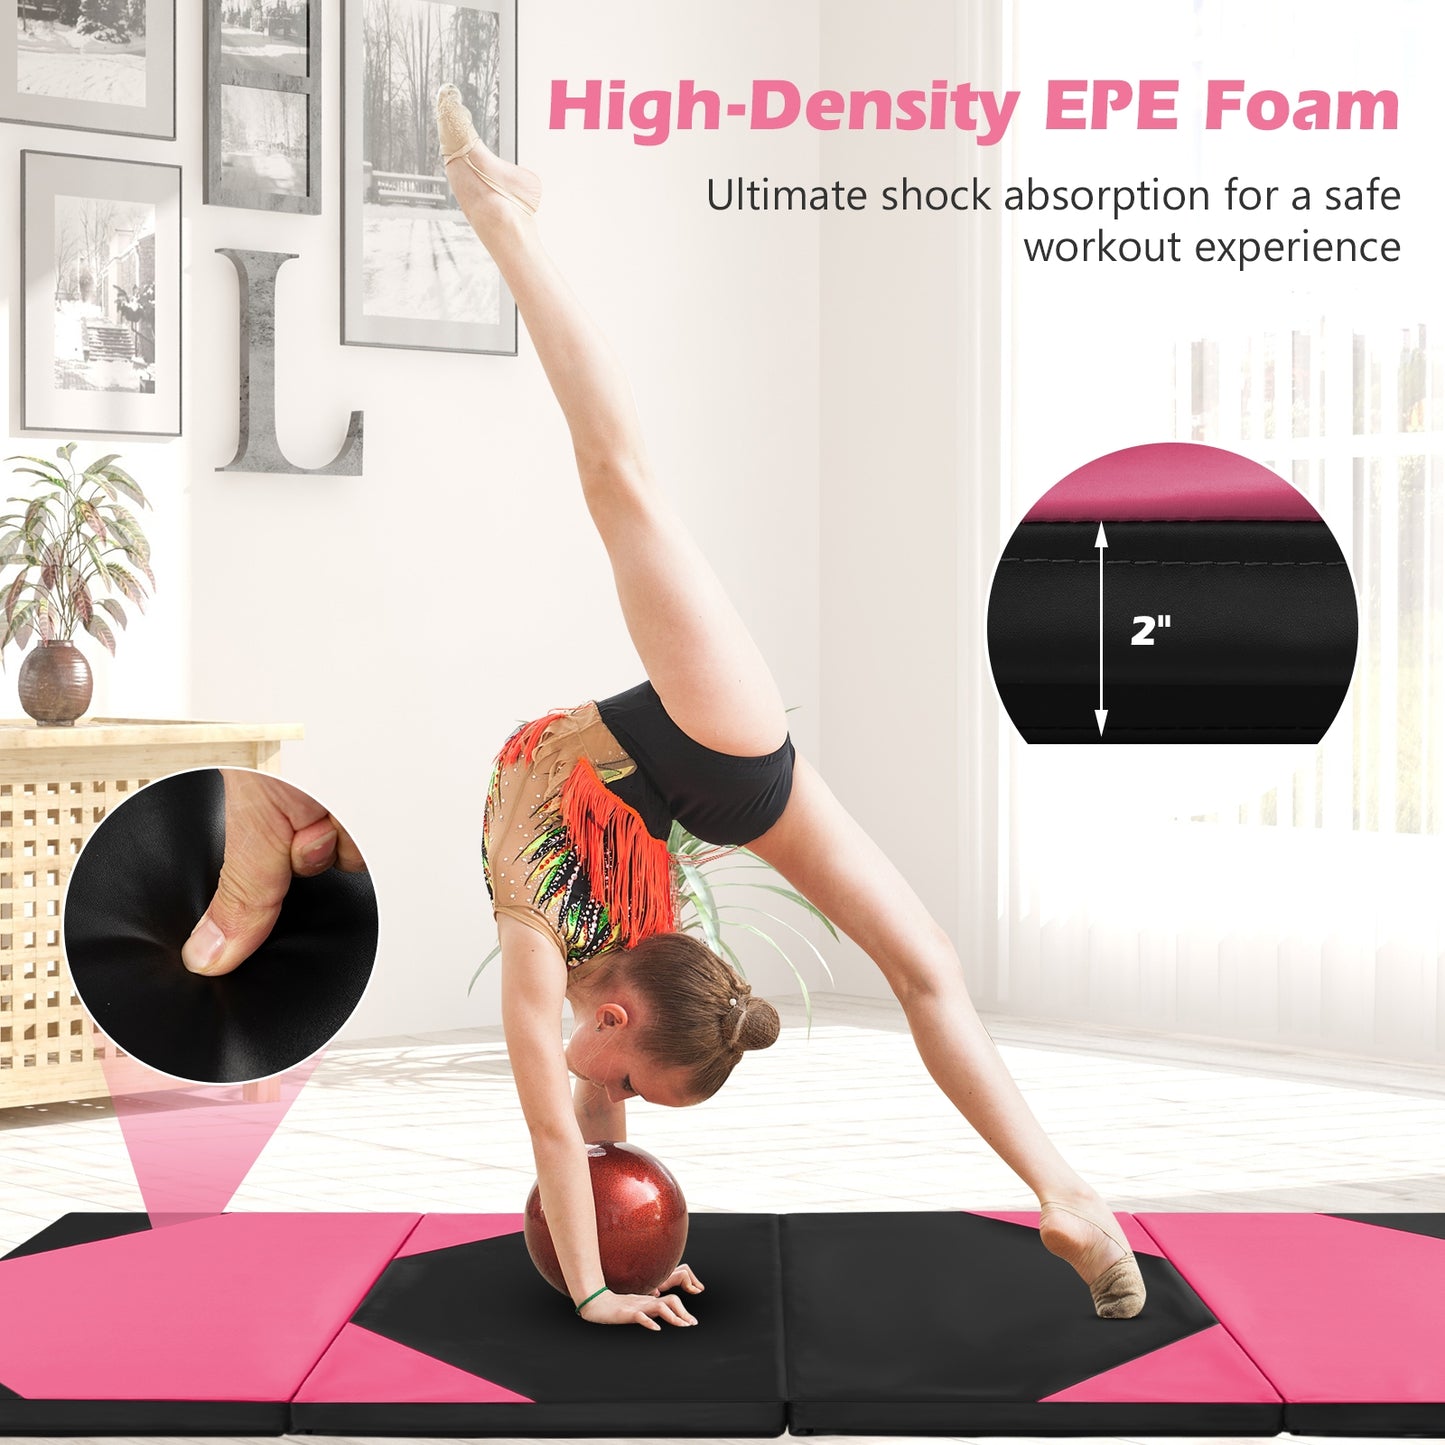 10' x 4' x 2" Folding Exercise Mat with Hook and Loop Fasteners-Black & Pink